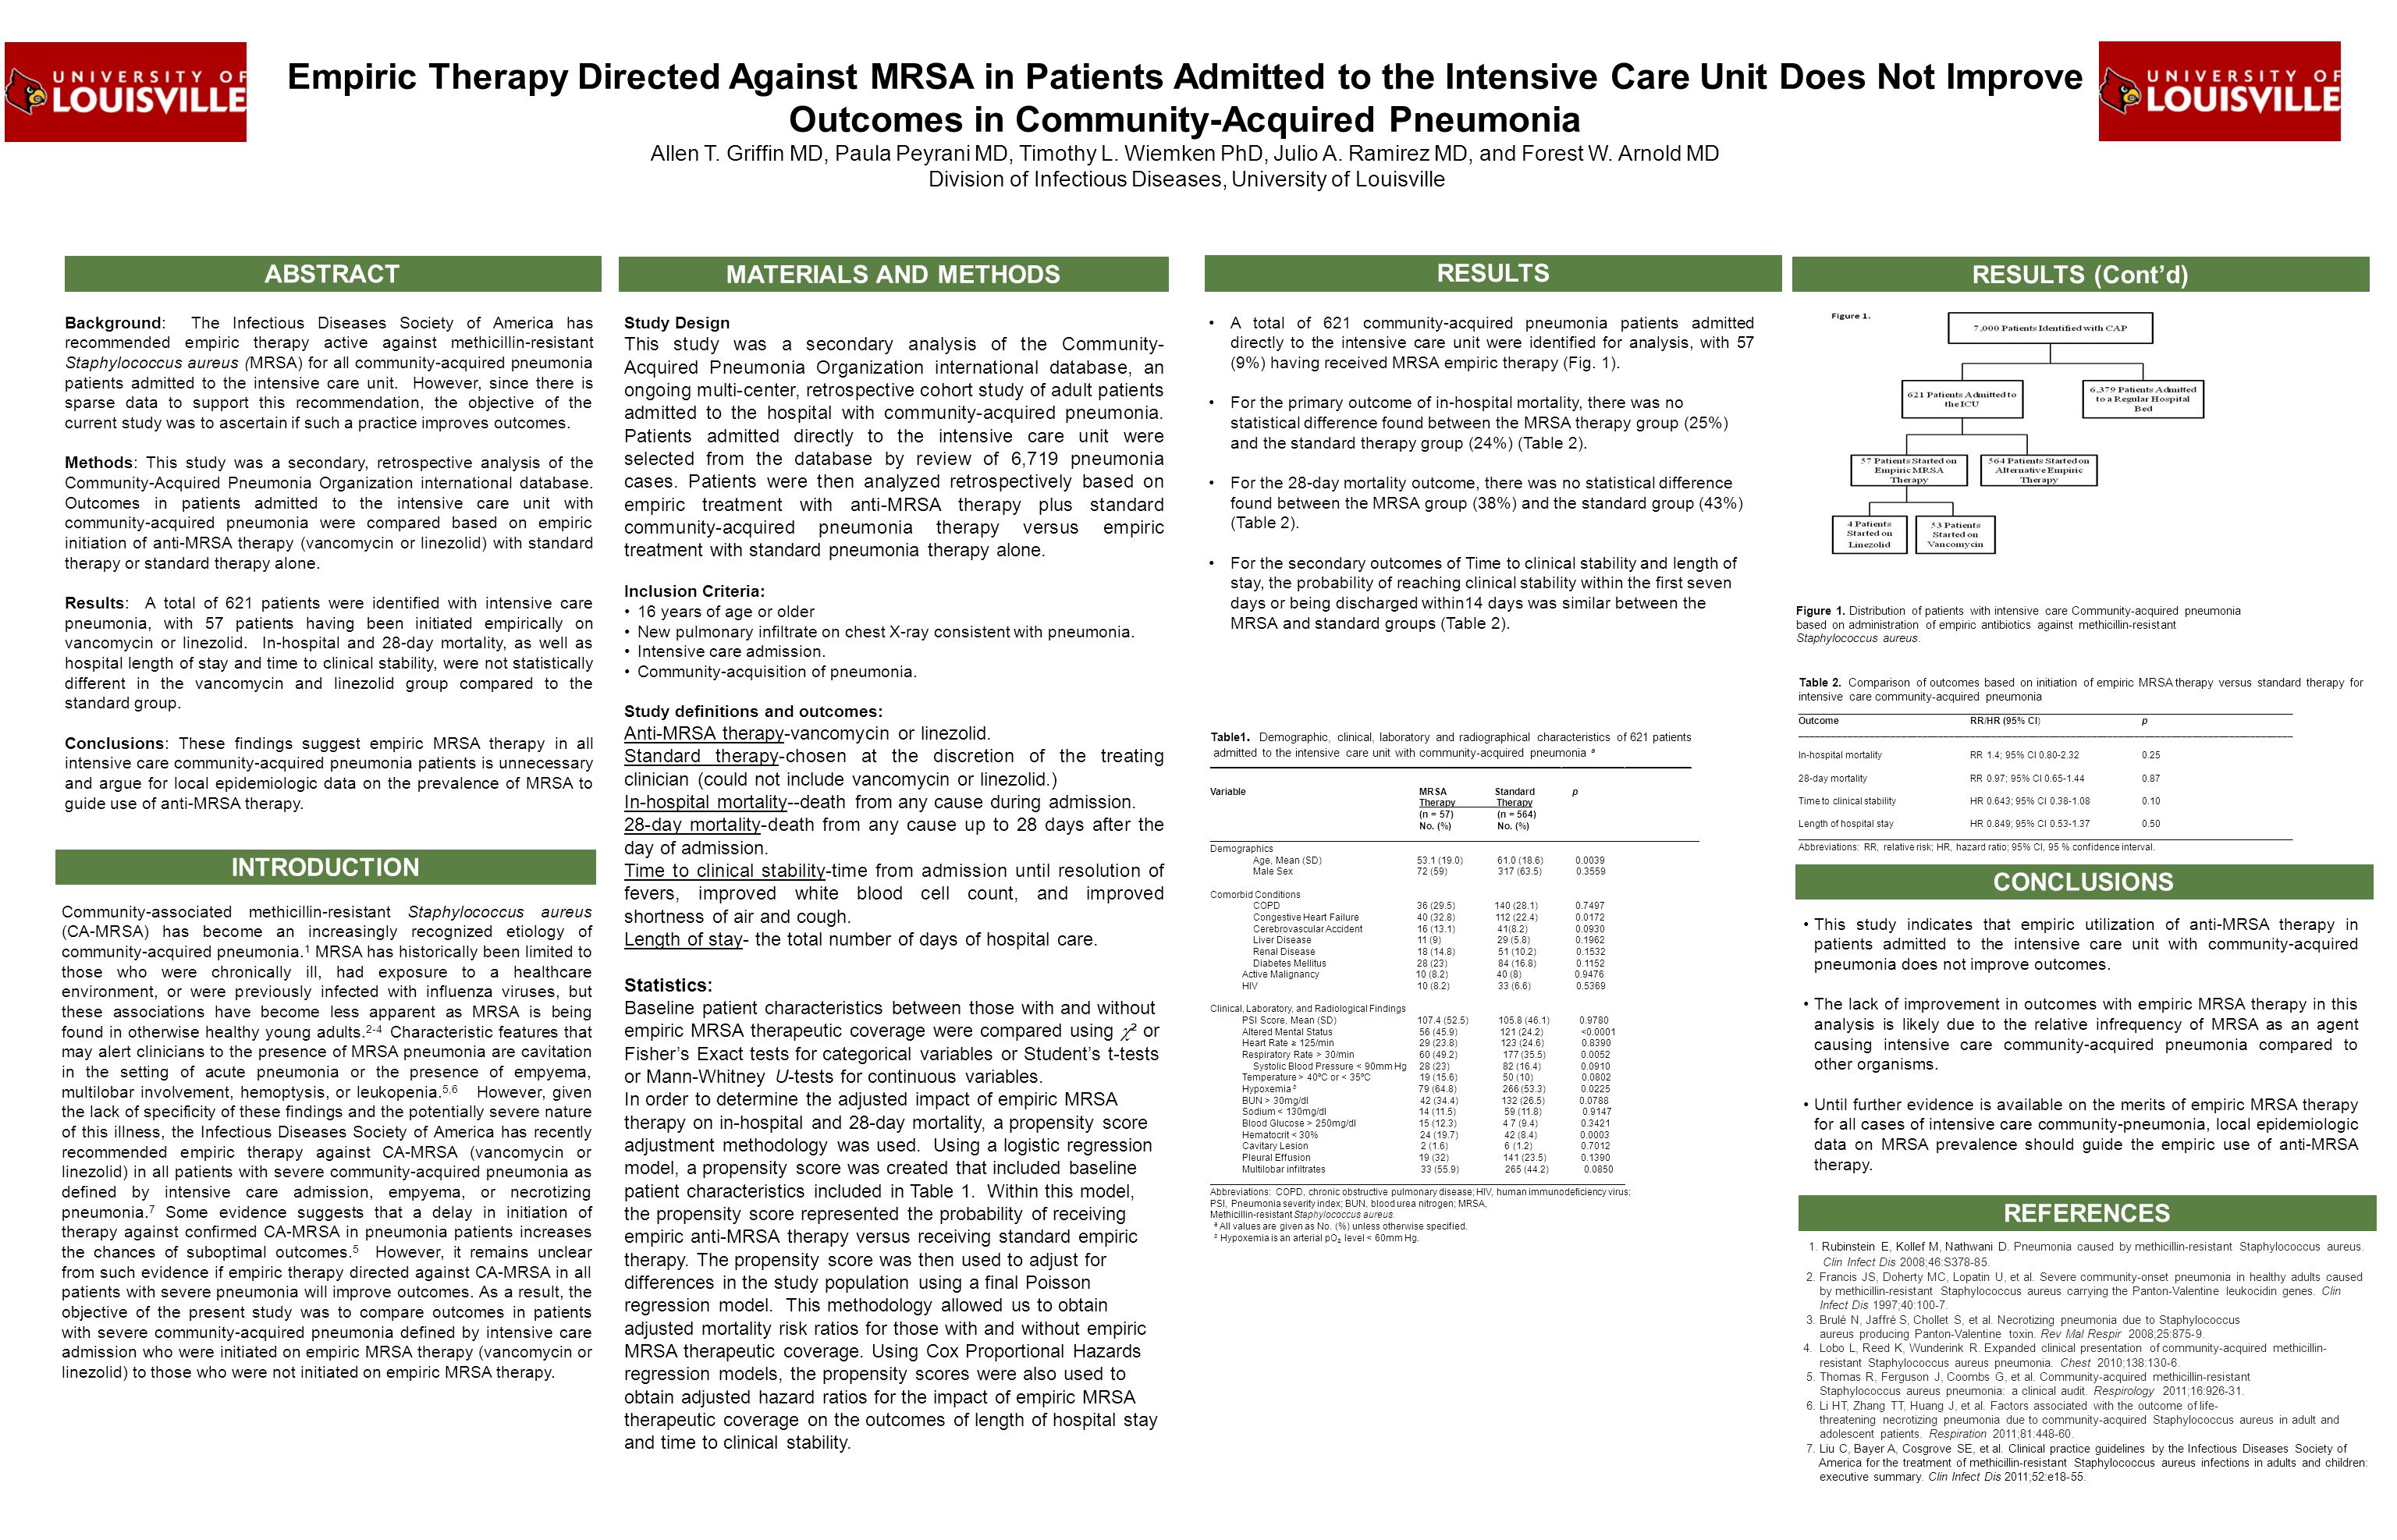 Empiric Therapy Directed Against MRSA in Patients Admitted to the Intensive Care Unit Does Not Improve Outcomes in Community-Acquired Pneumonia Allen T.